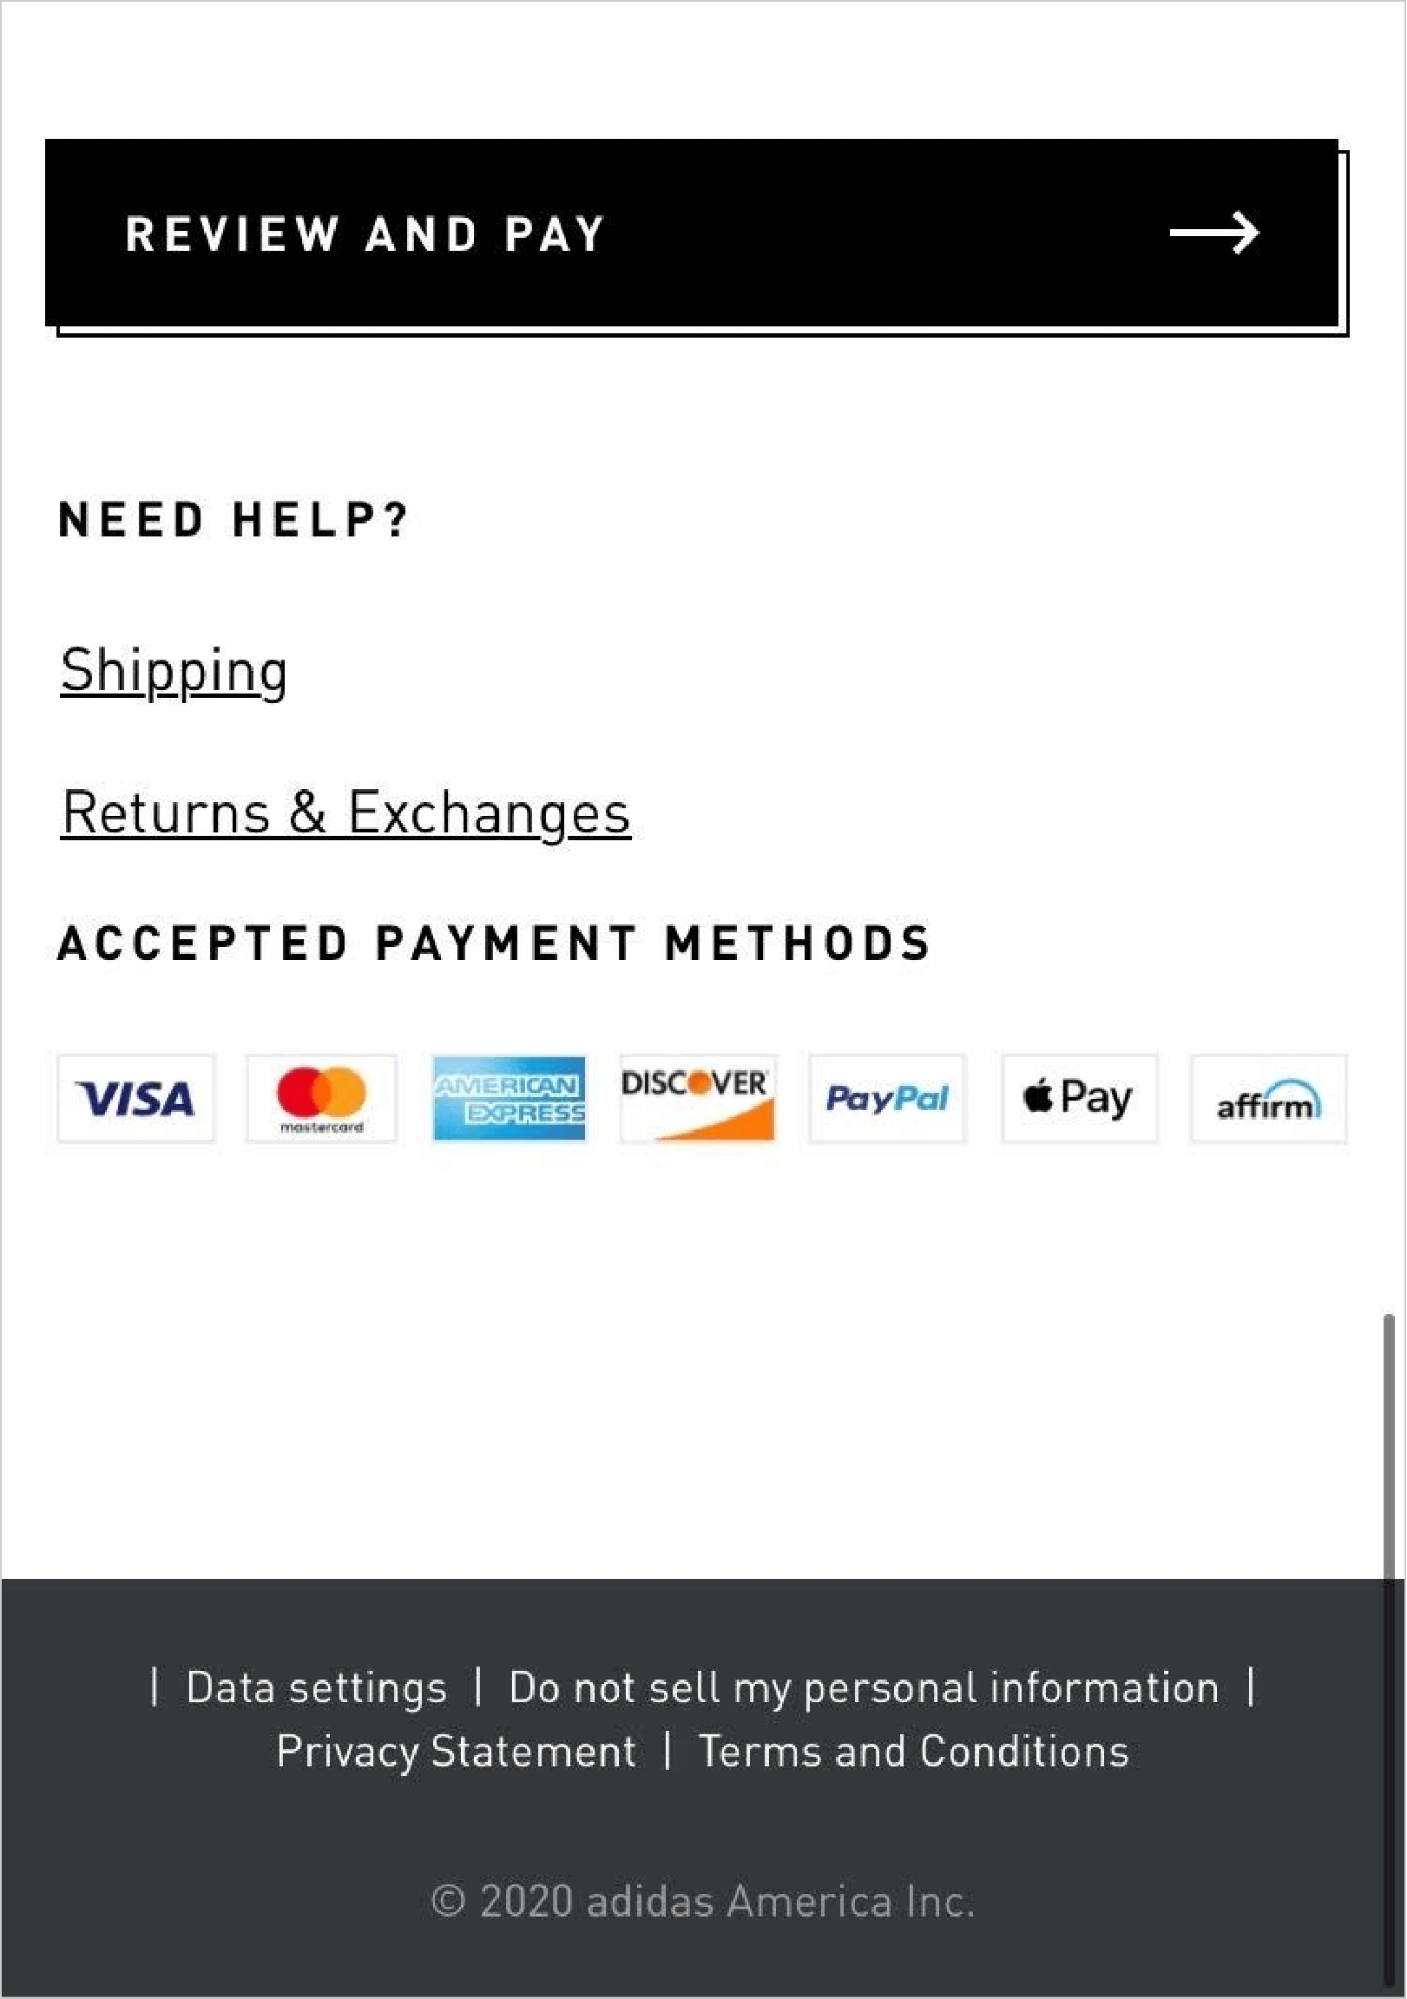 Provide Different Payment Options